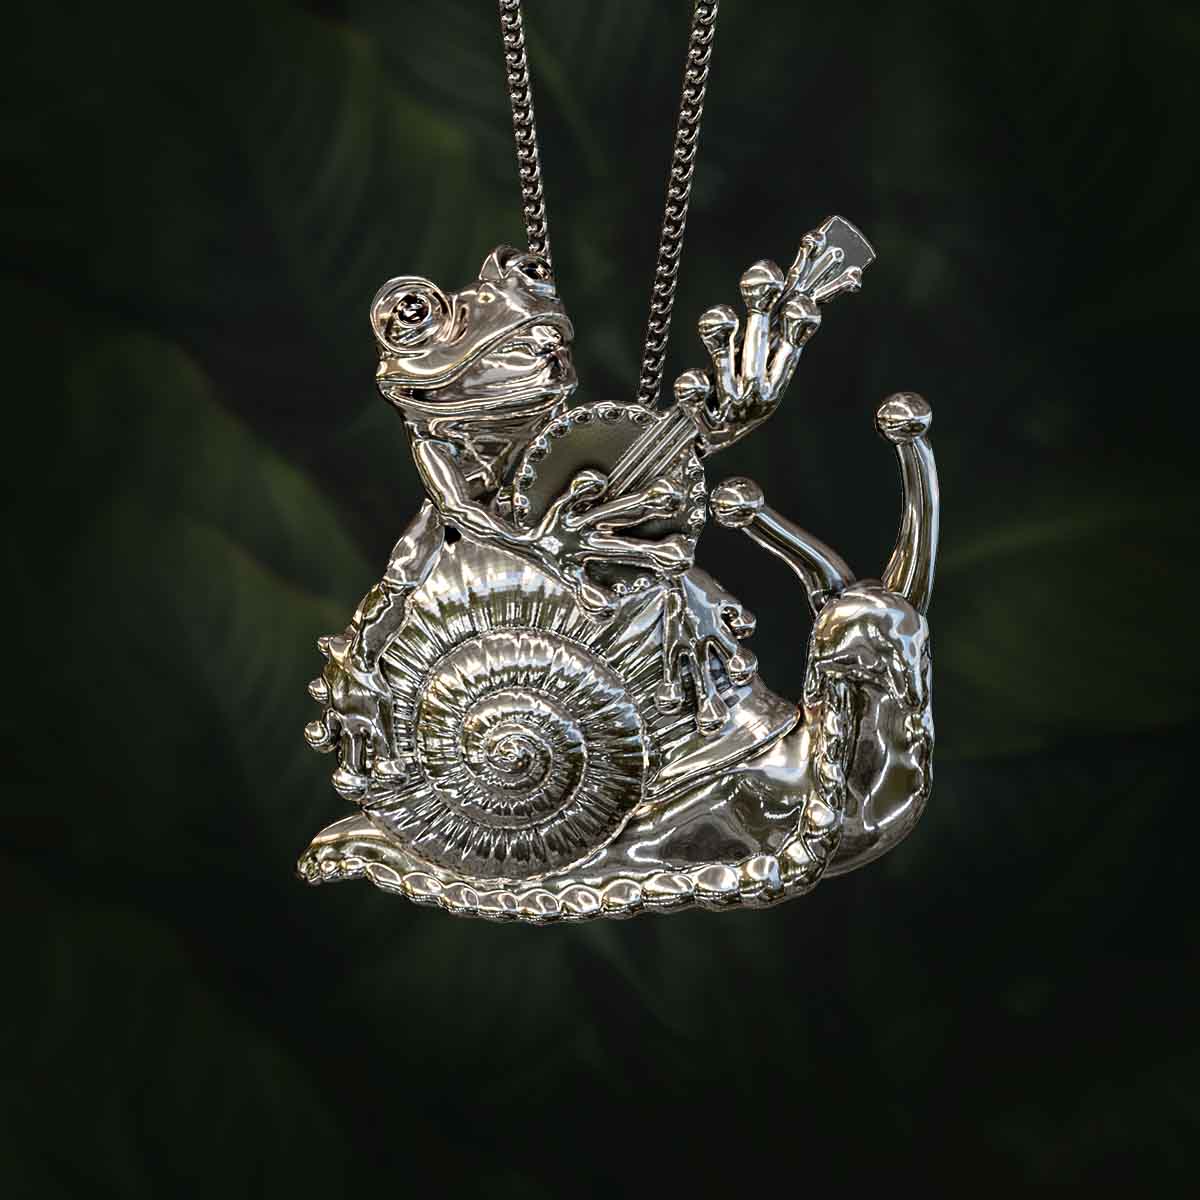 Main-Image-White-Gold-Rhodium-Finish-Serenading-Frog-and-Snail-Pendant-Jewelry-For-Necklace